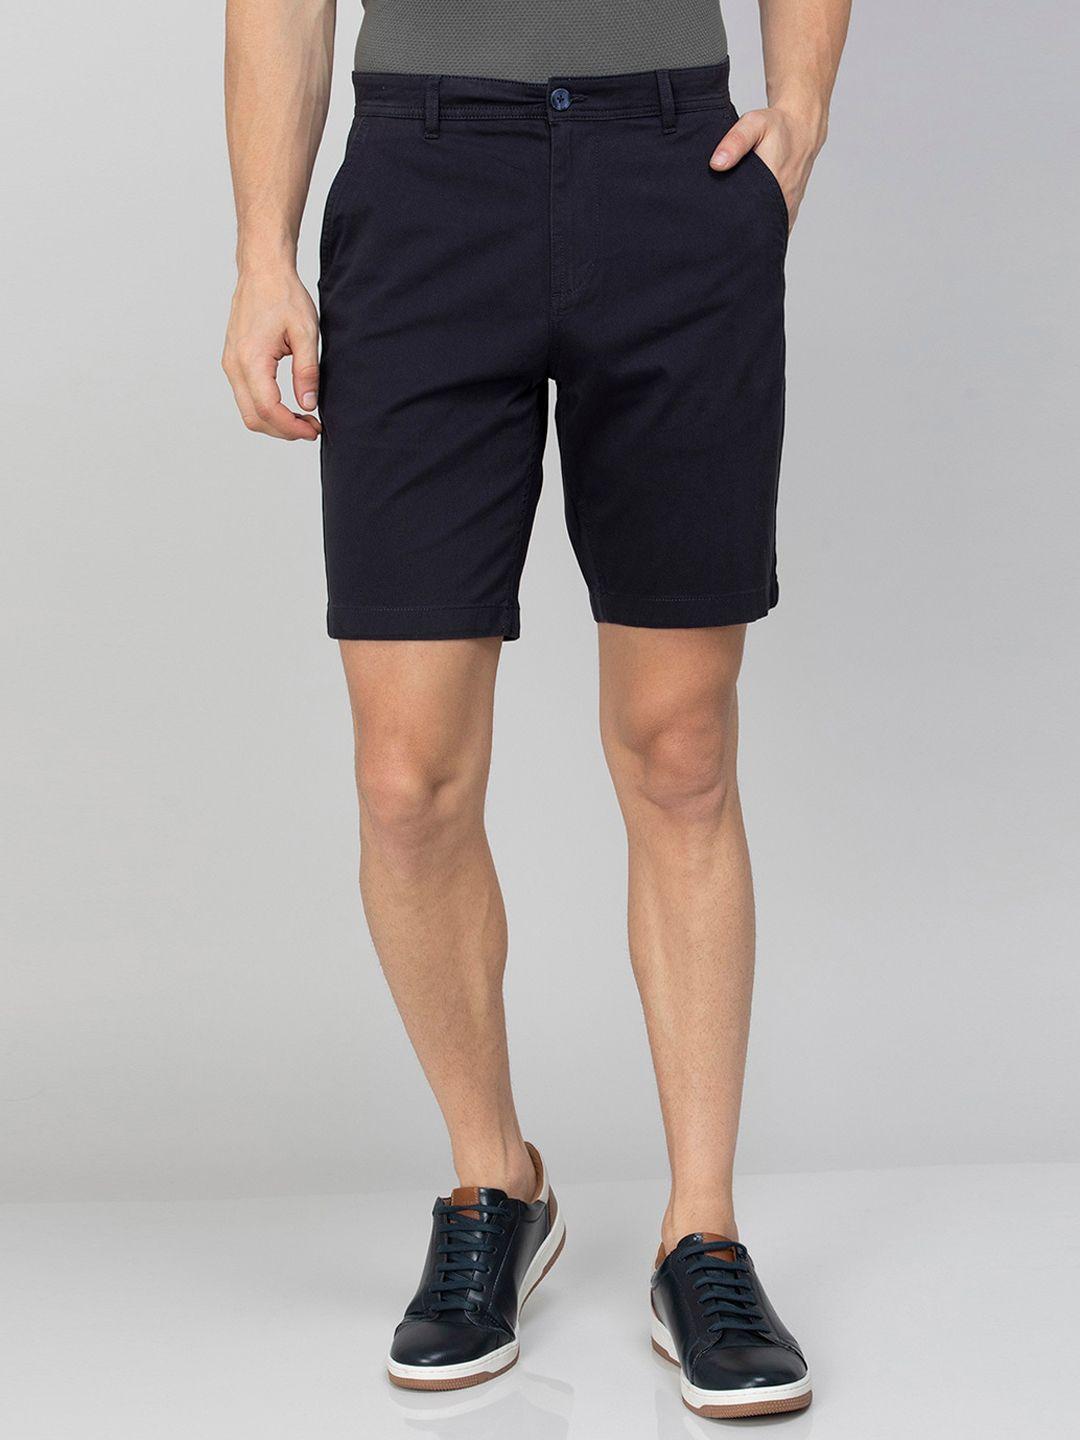 fame-forever-by-lifestyle--men-cotton-mid-rise-shorts